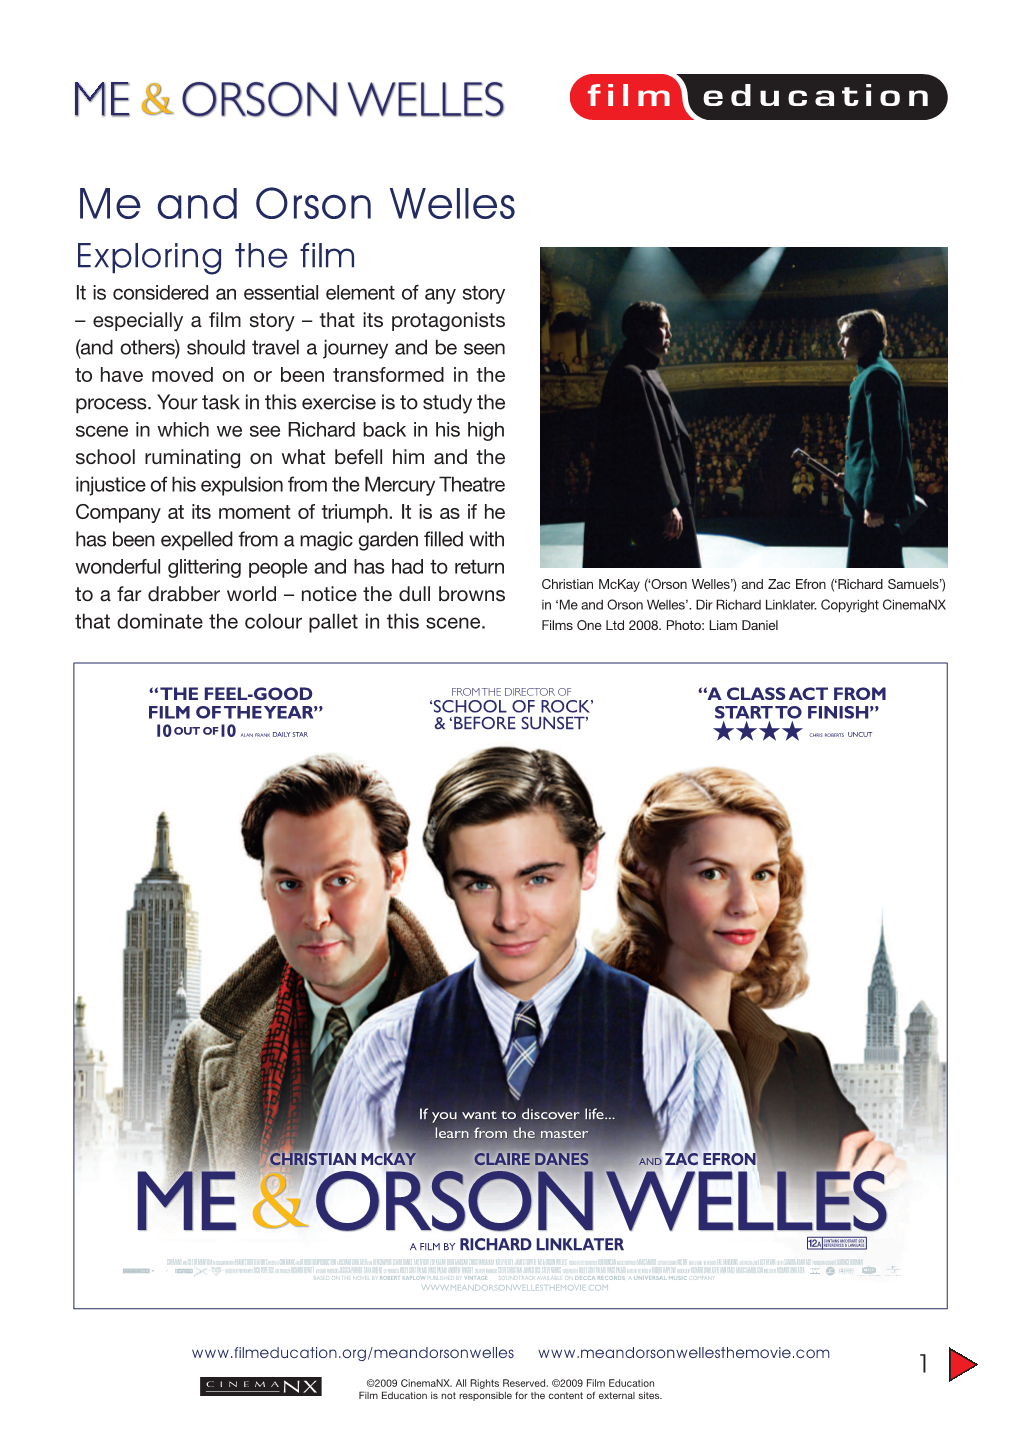 Me and Orson Welles – Exploring the Film